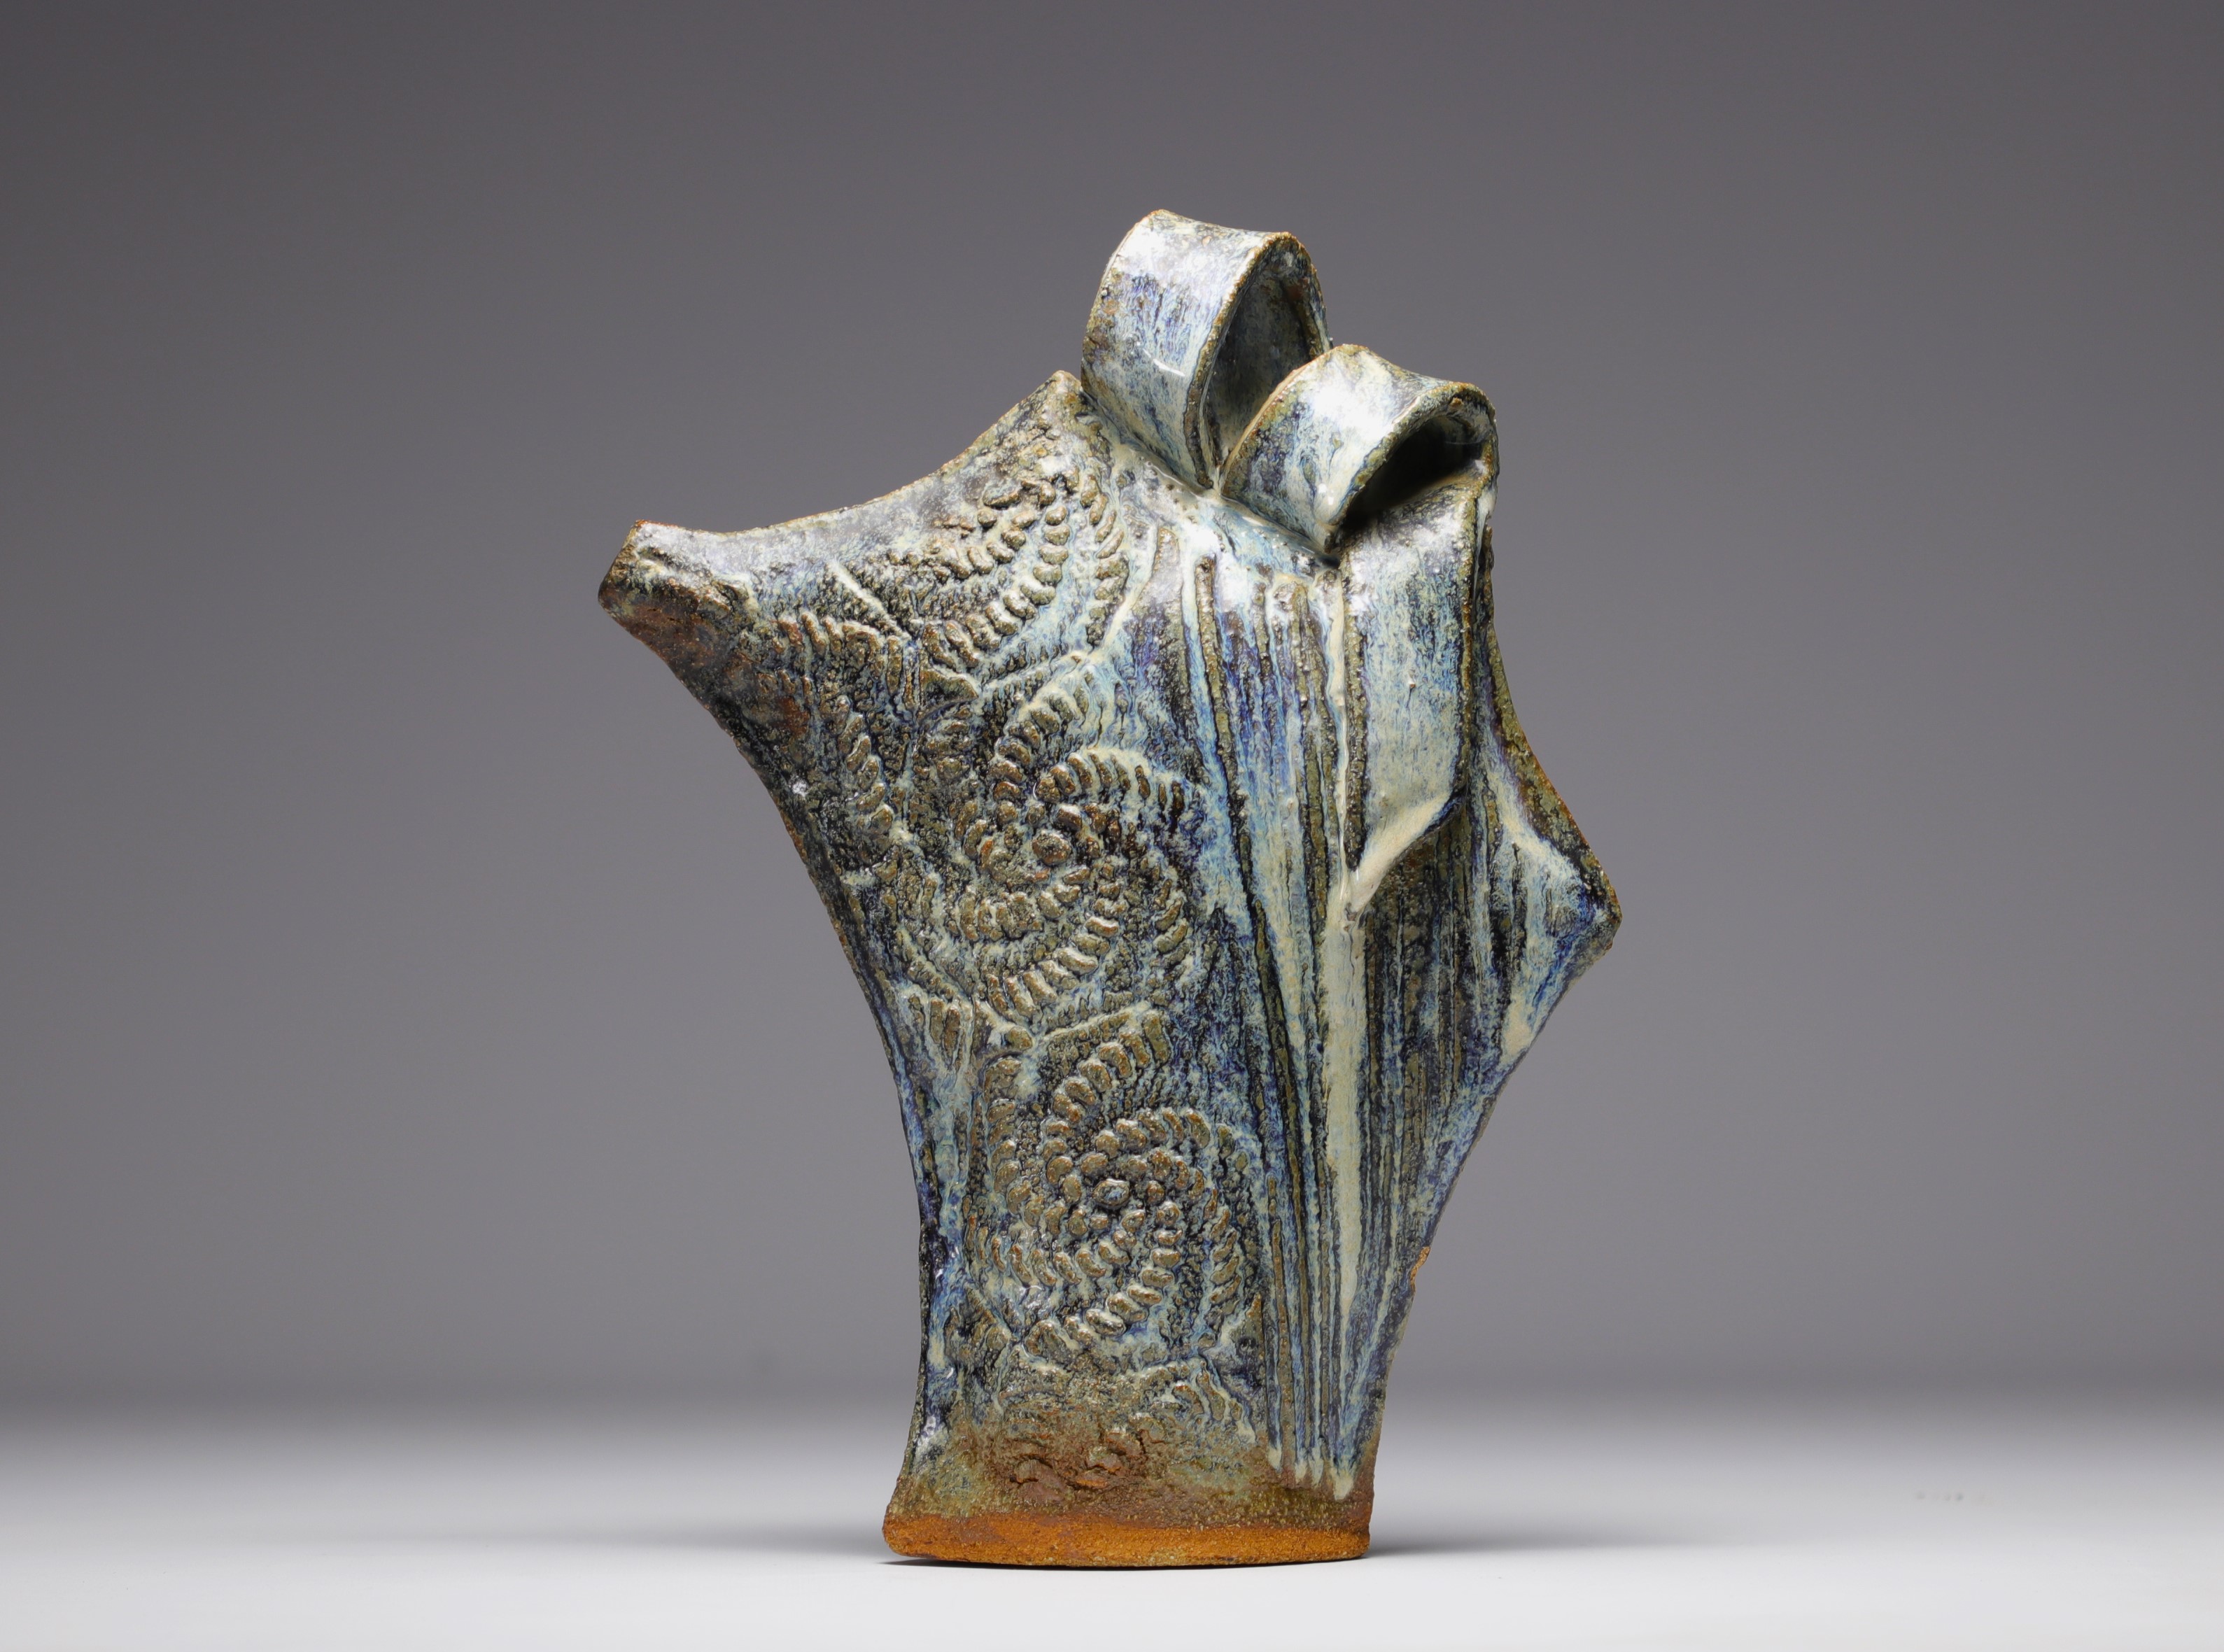 Zoomorphic sculpture in glazed terracotta, signed below the piece. - Image 2 of 5